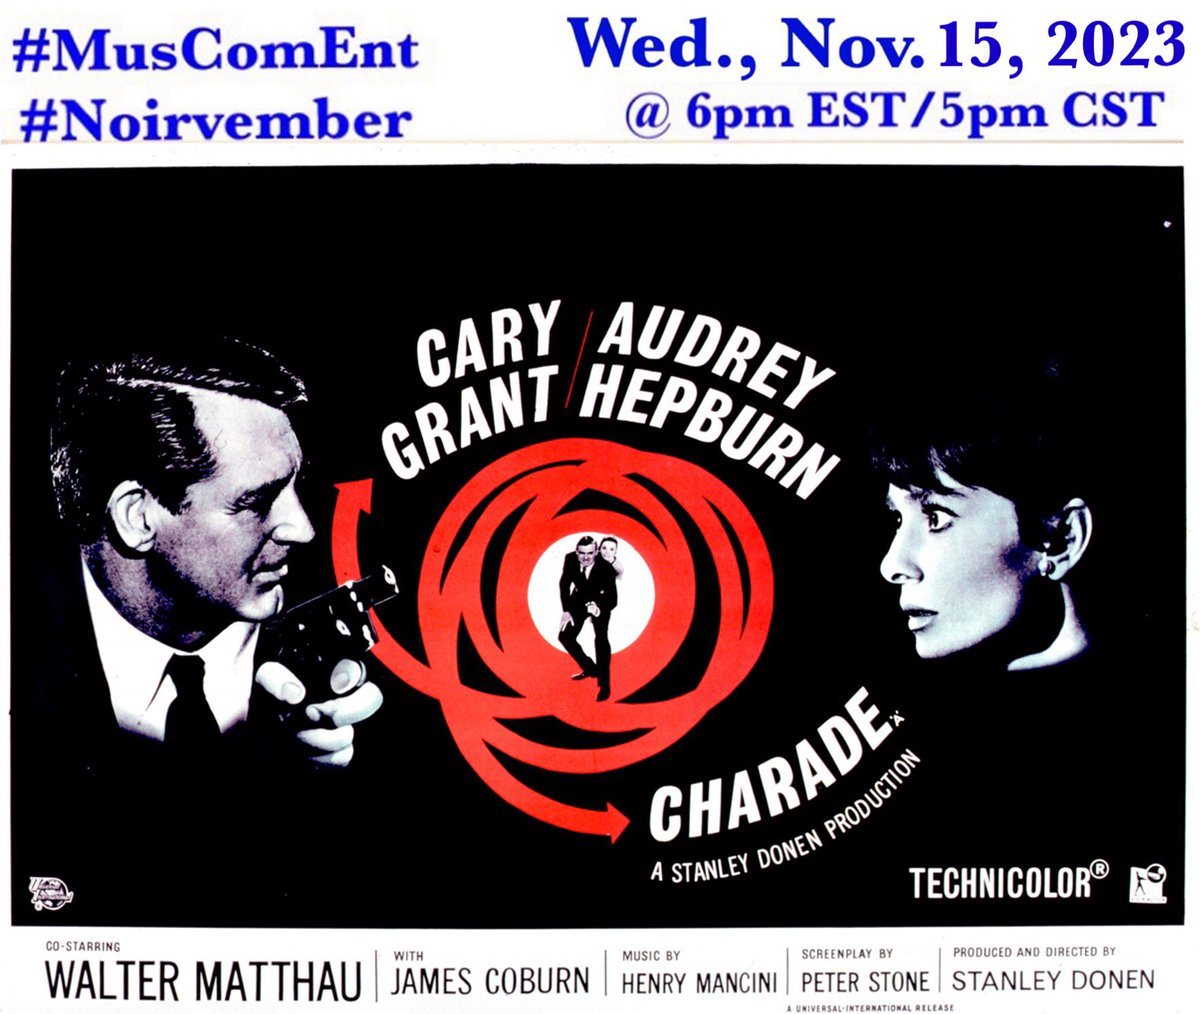 BTW We’ll have more Cary Grant for Noirvember with “Charade” (1963)!
#MusComEnt